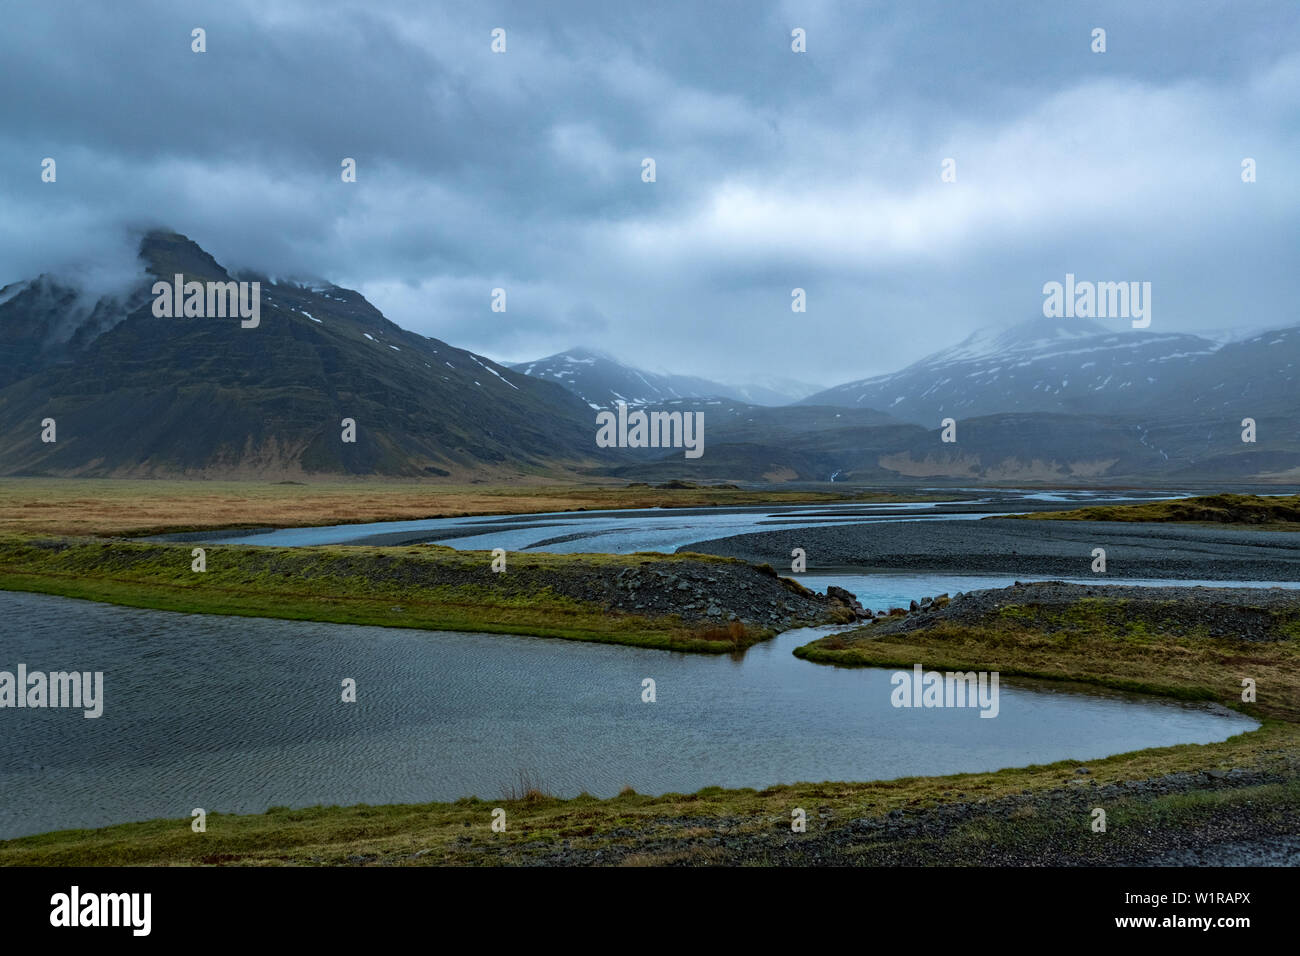 Vast landscape of the mountains, lakes and glaciers of the Skaftafell region of southeastern Iceland Stock Photo